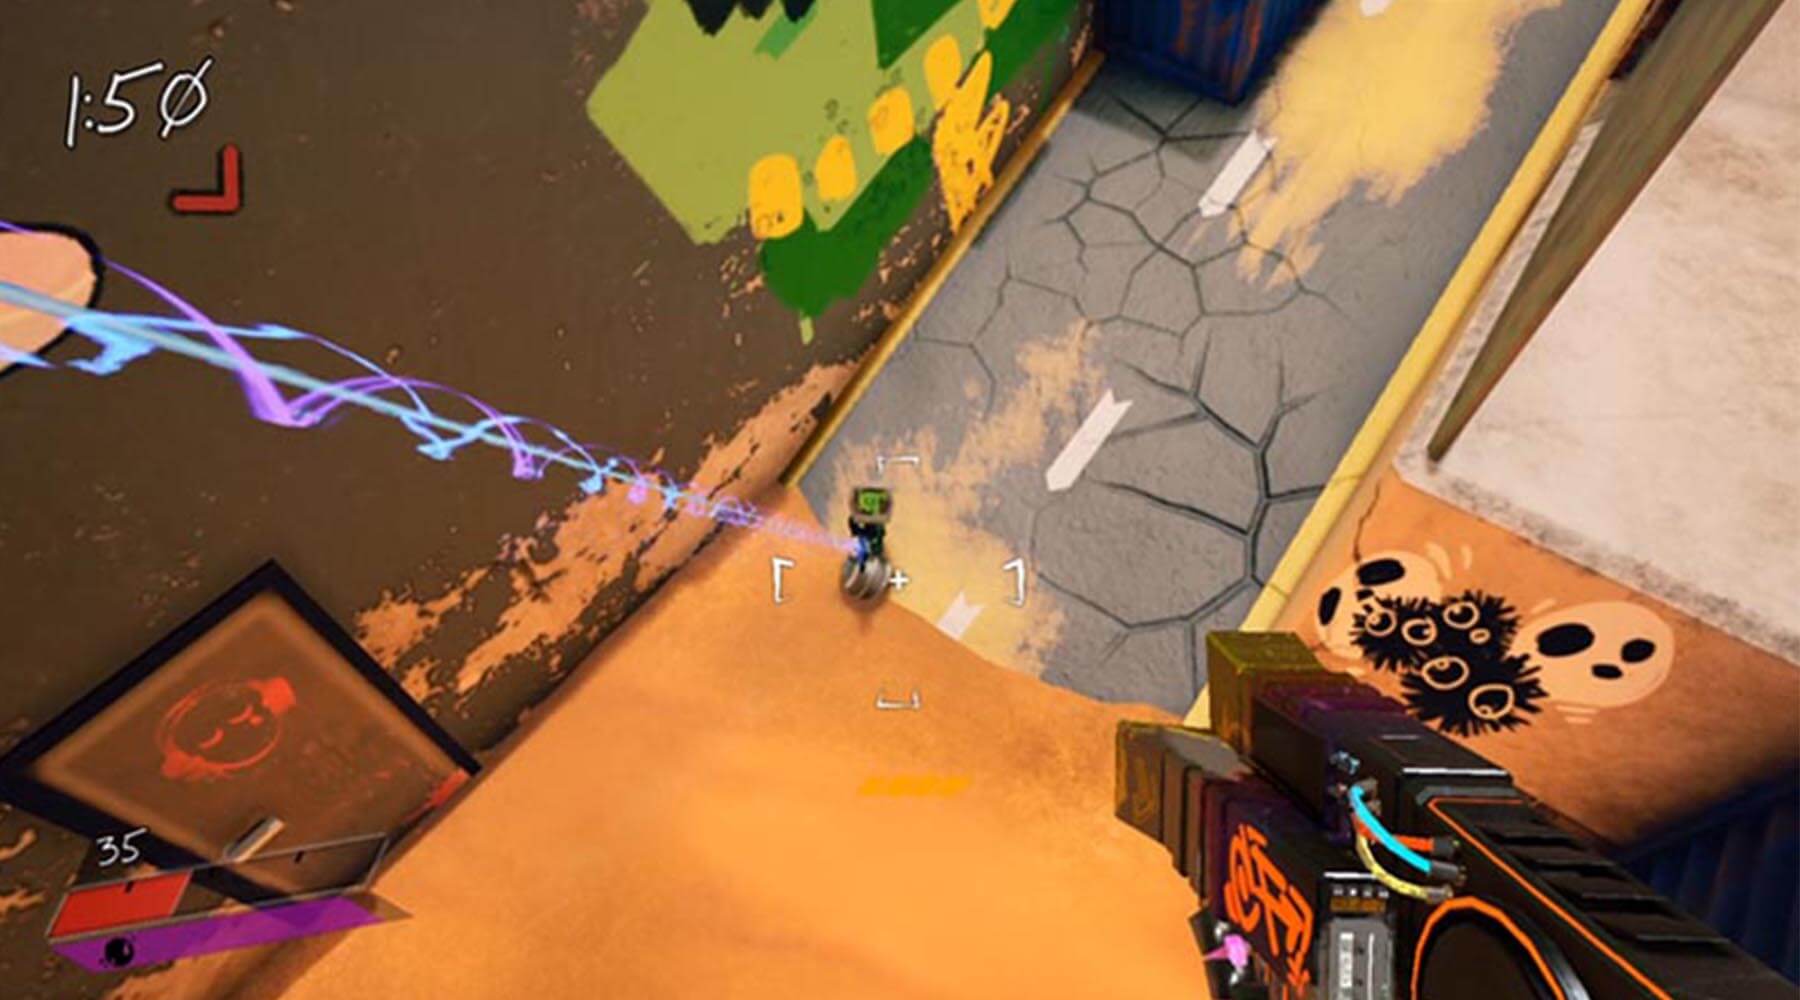 In-game screenshot of player, midair, aiming weapon's crosshair down at enemy robot.